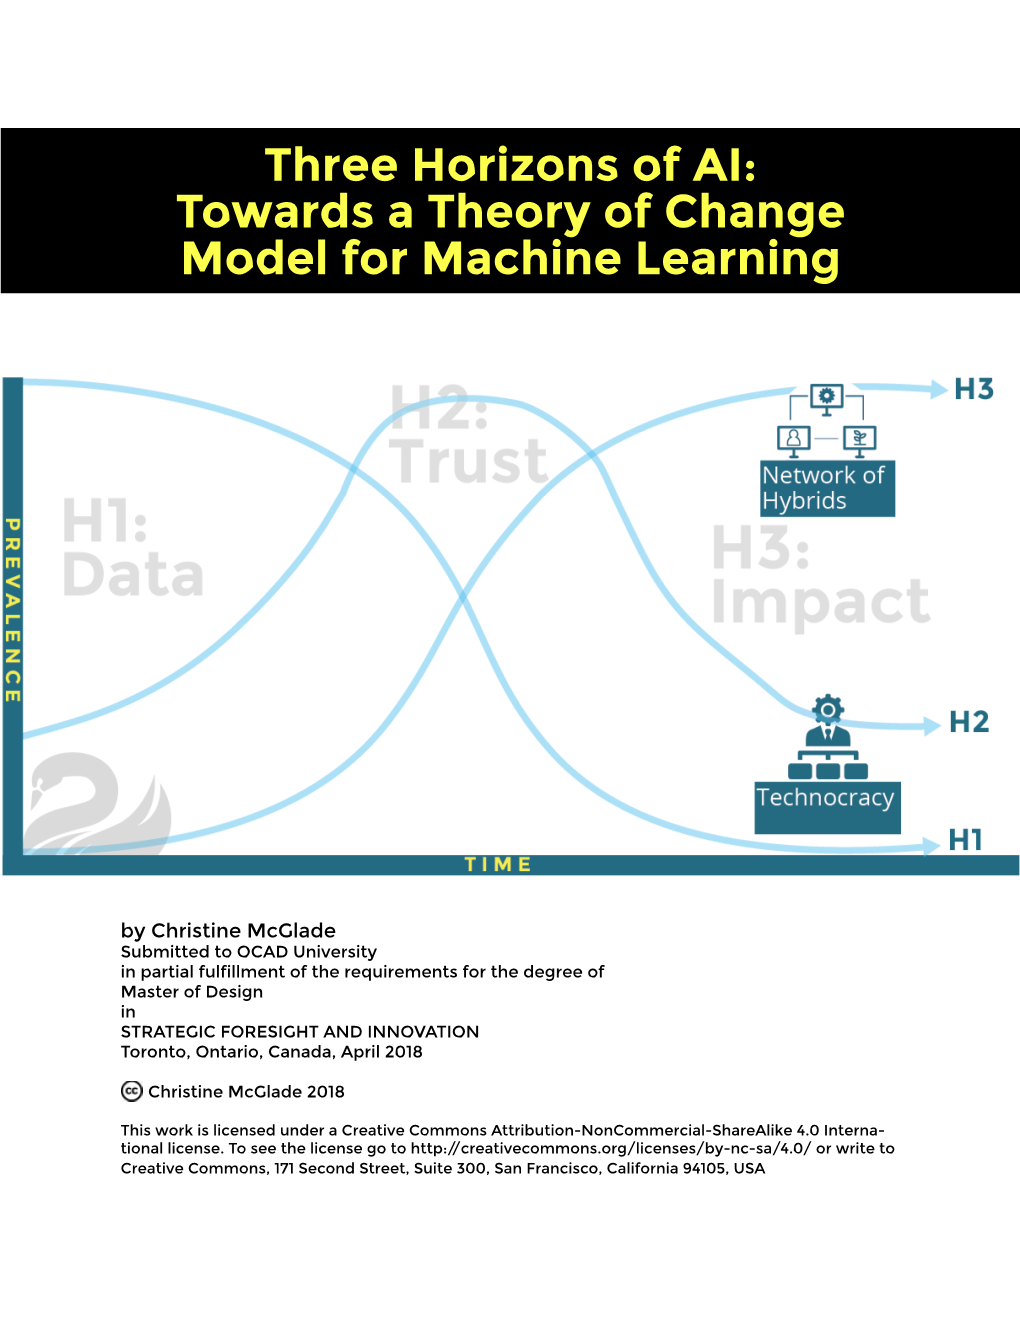 Three Horizons of AI: Towards a Theory of Change Model for Machine Learning